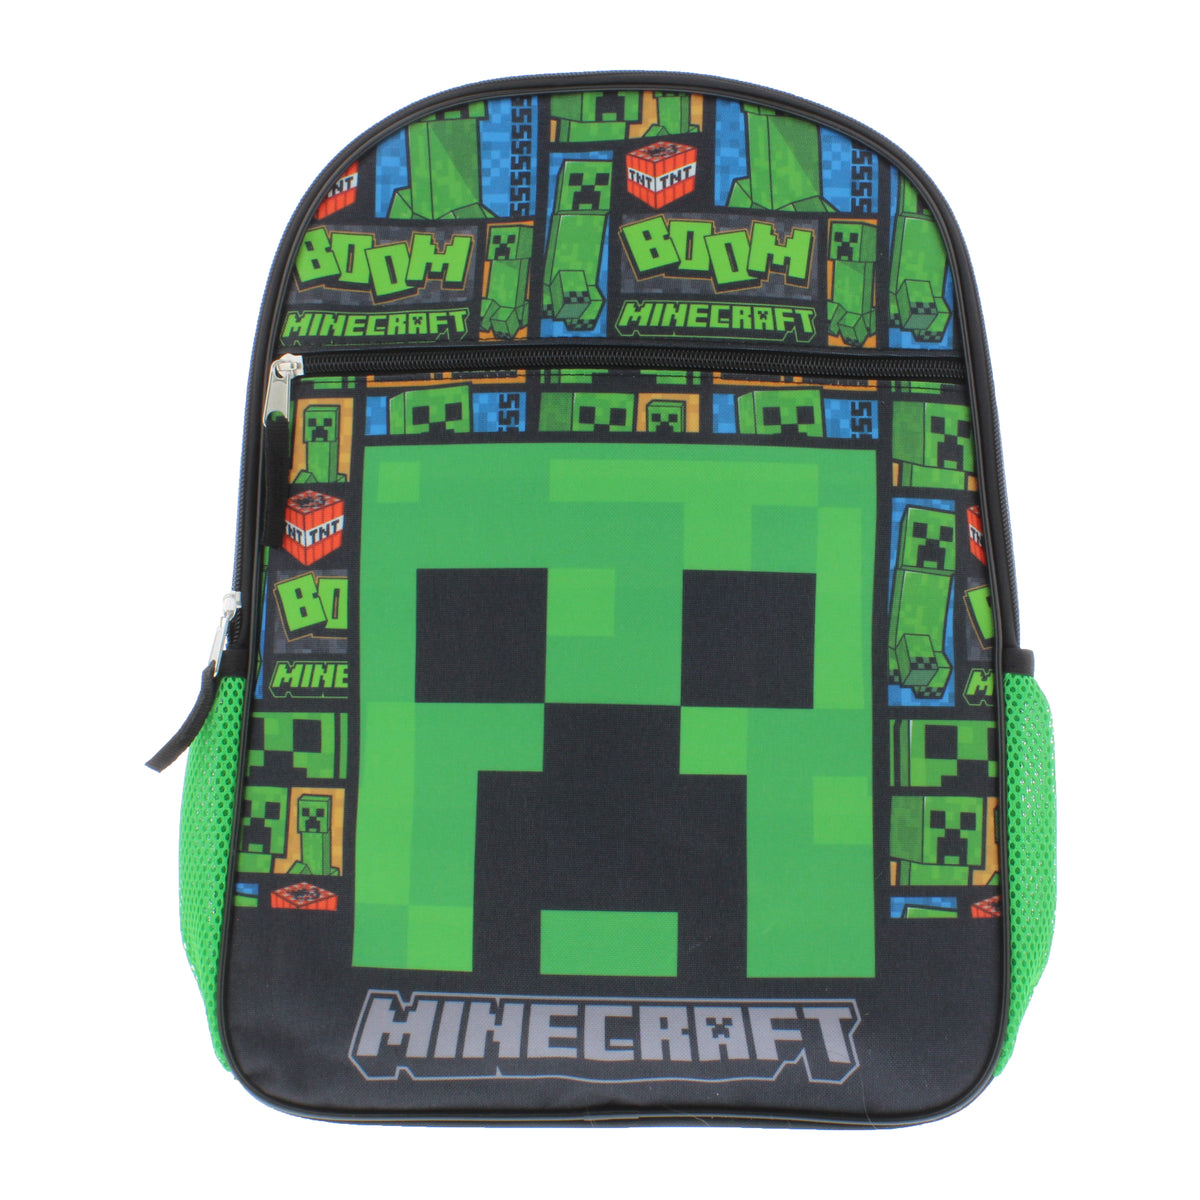 Minecraft Creeper Backpack TNT 5 Piece Set Lunch Box Pencil Case Bottle One  Size | eBay